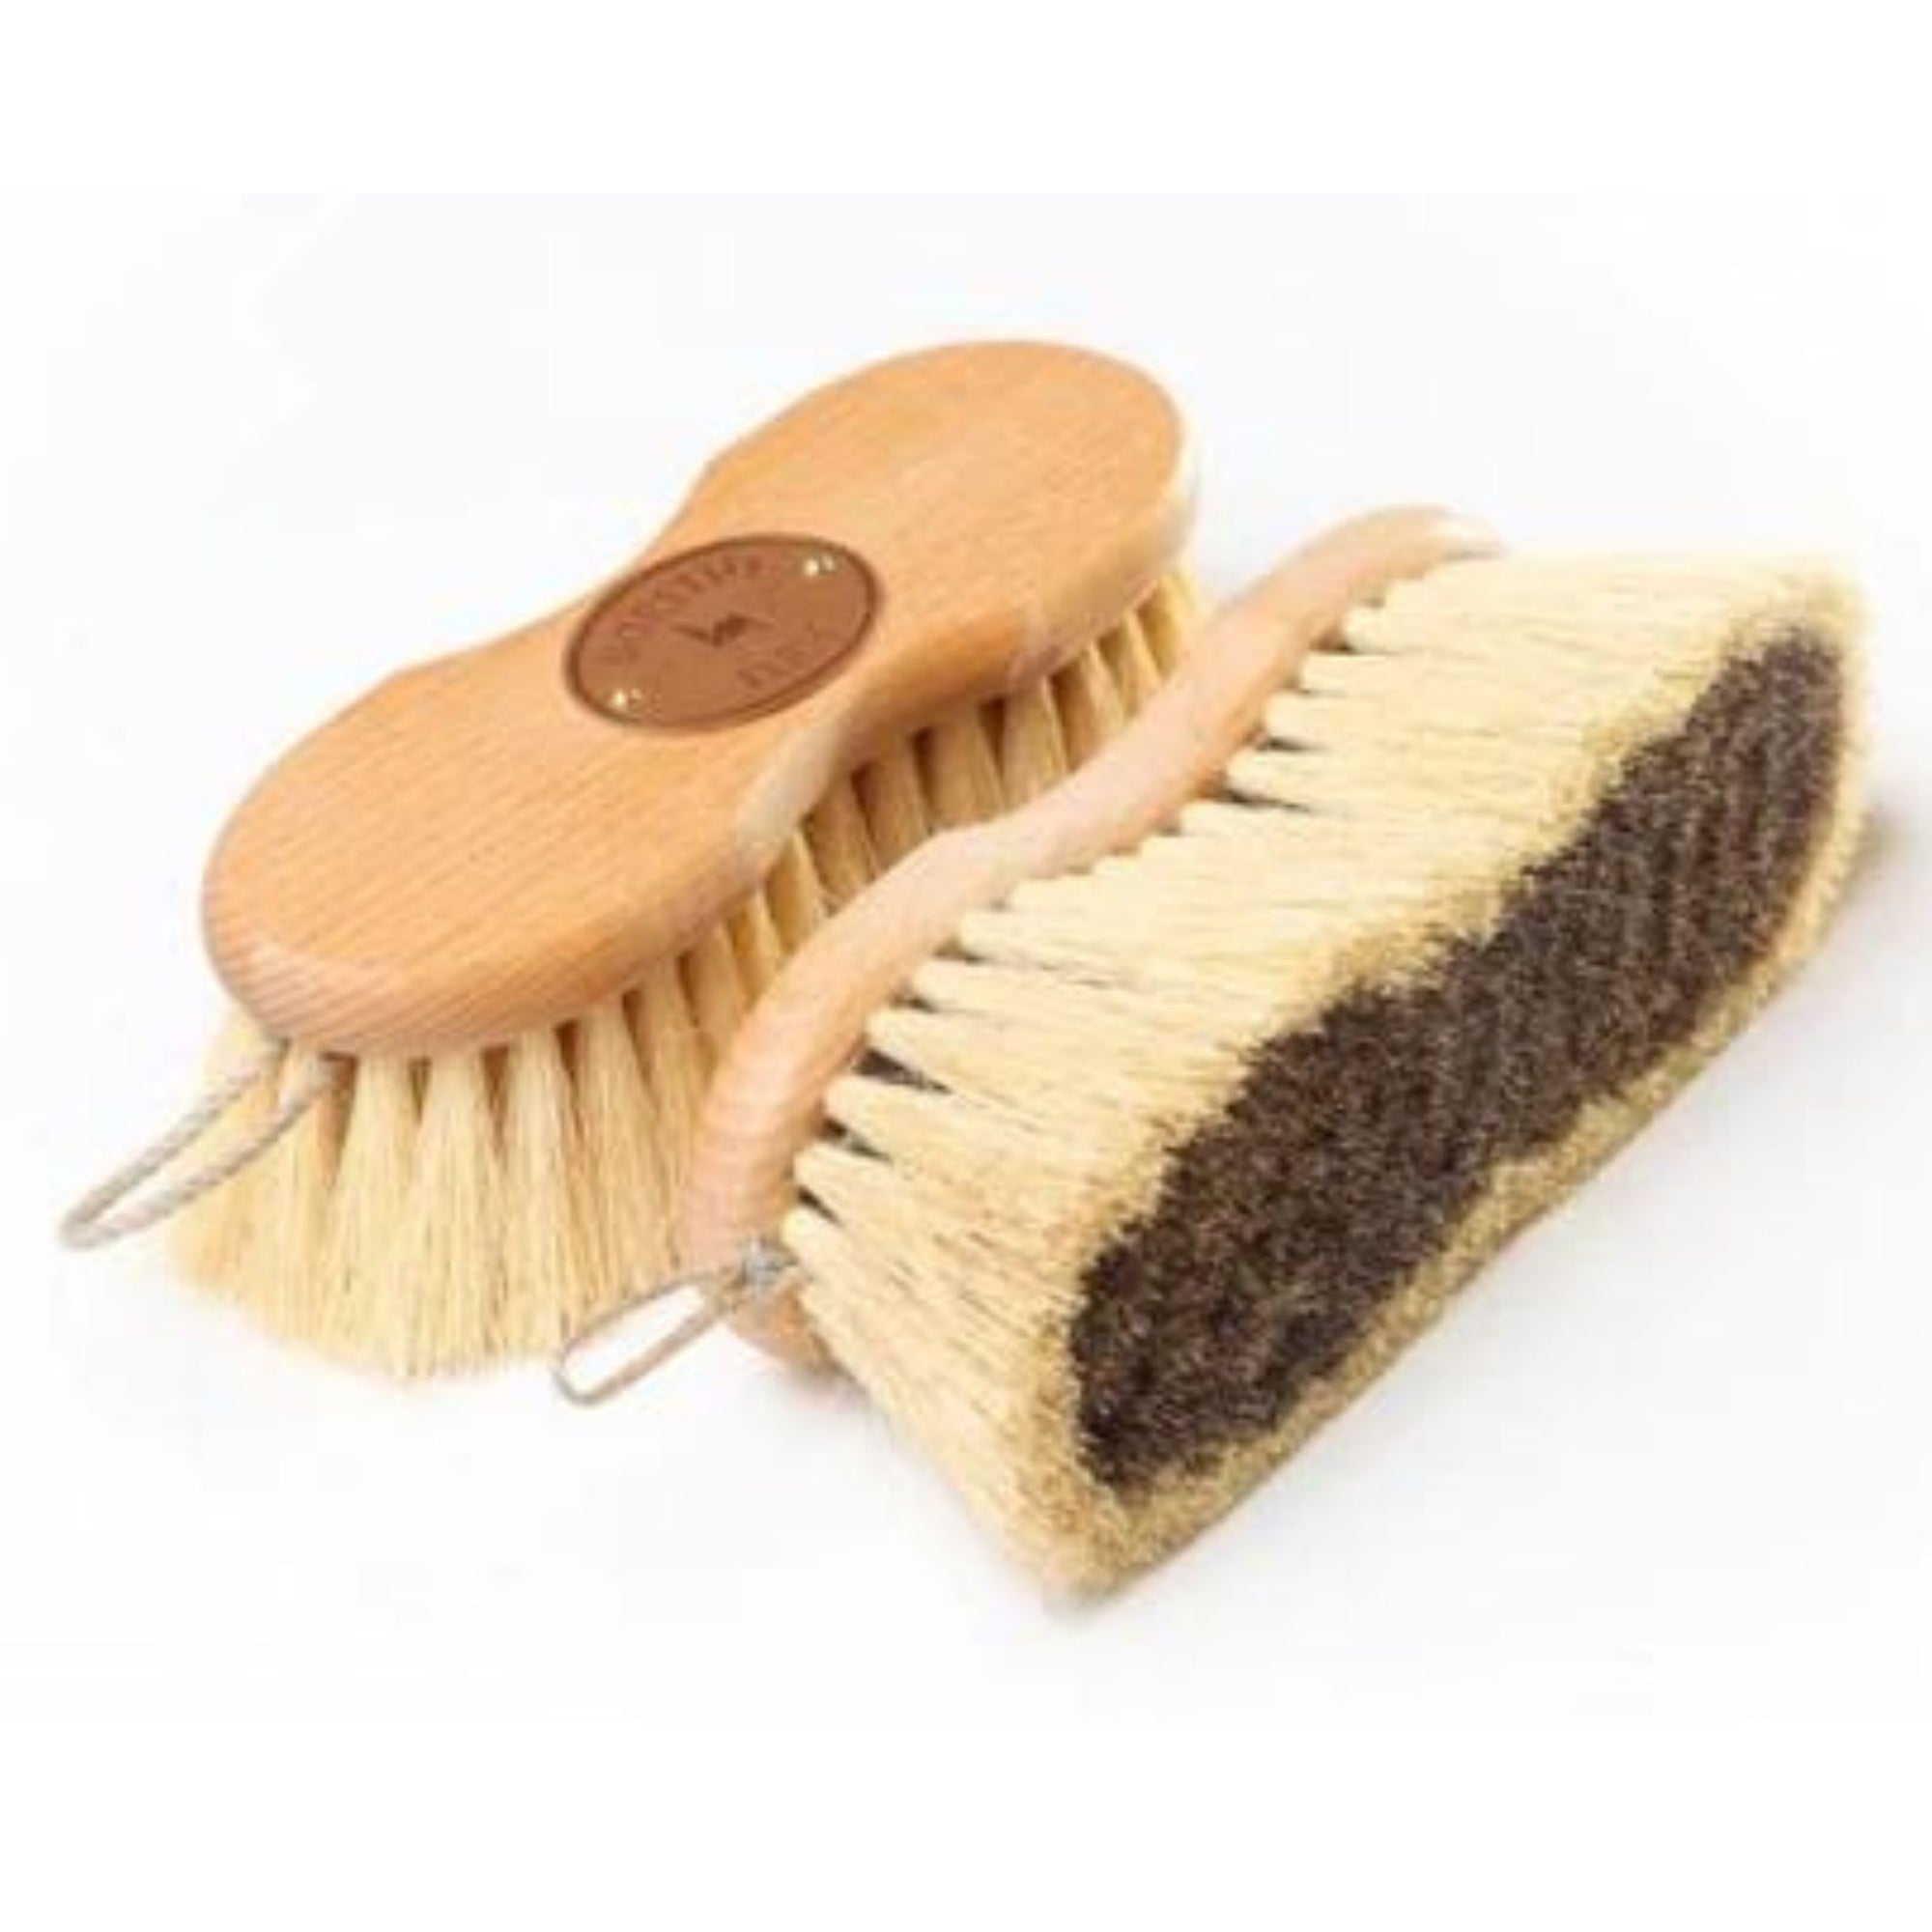 Wooden brush with a slight hourglass shaped handle, with white and brown bristles.